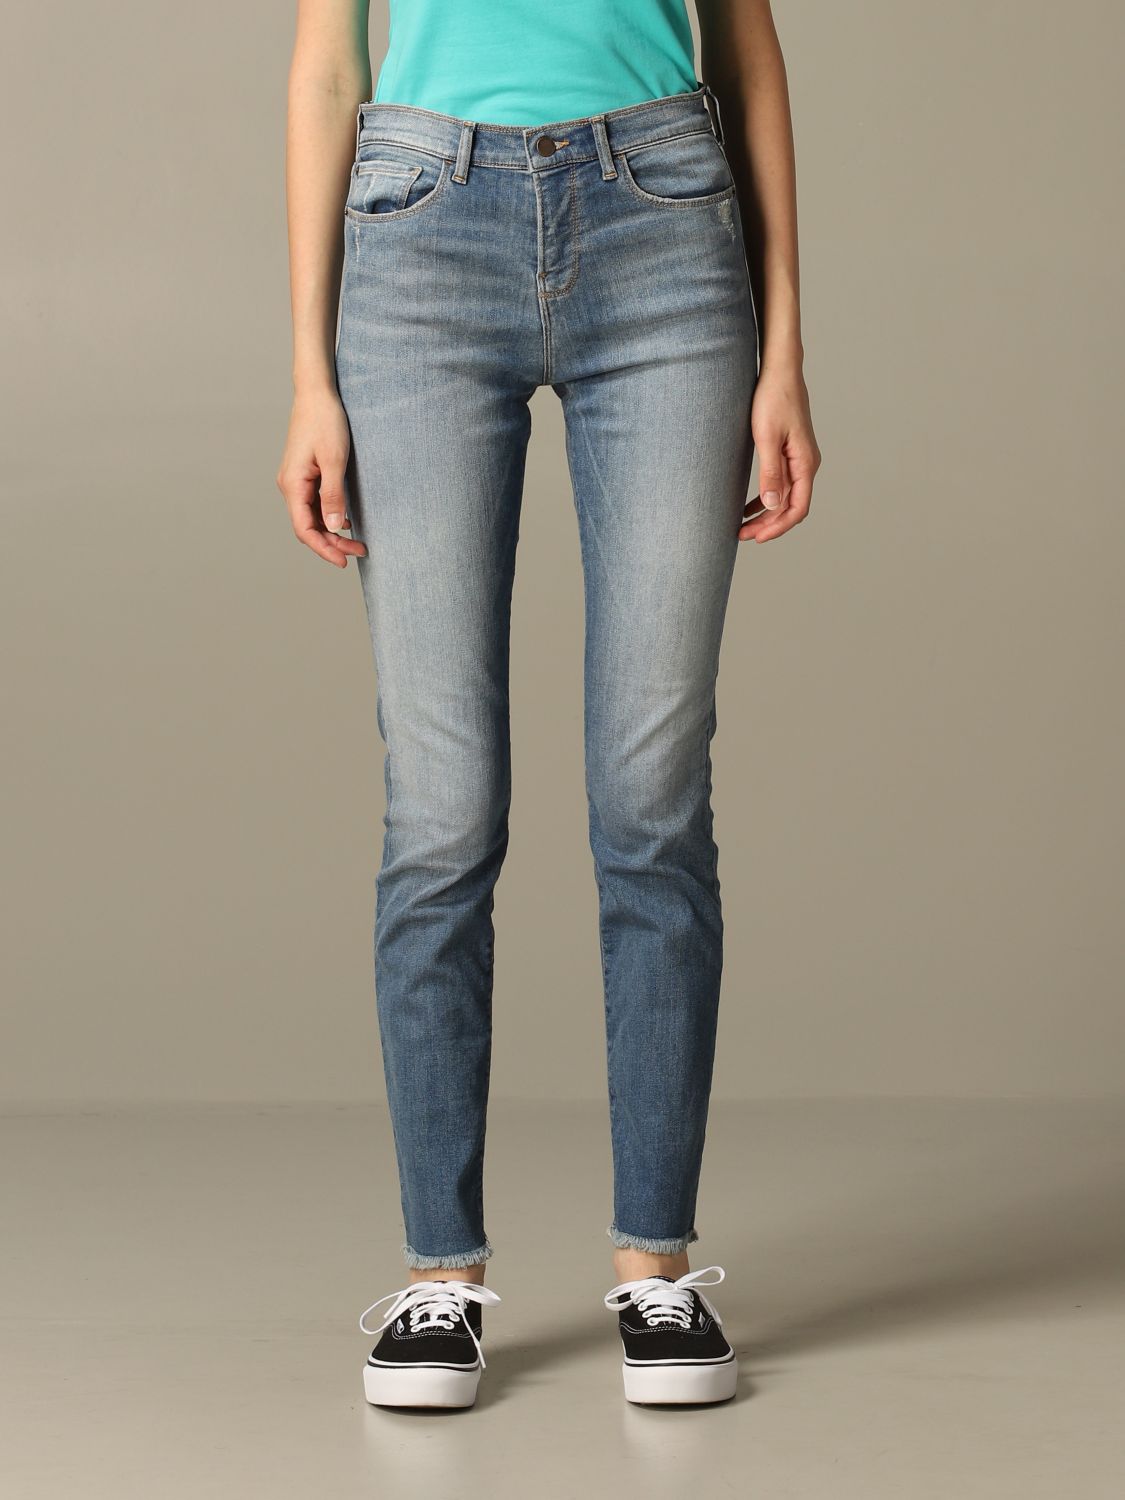 armani jeans for women's